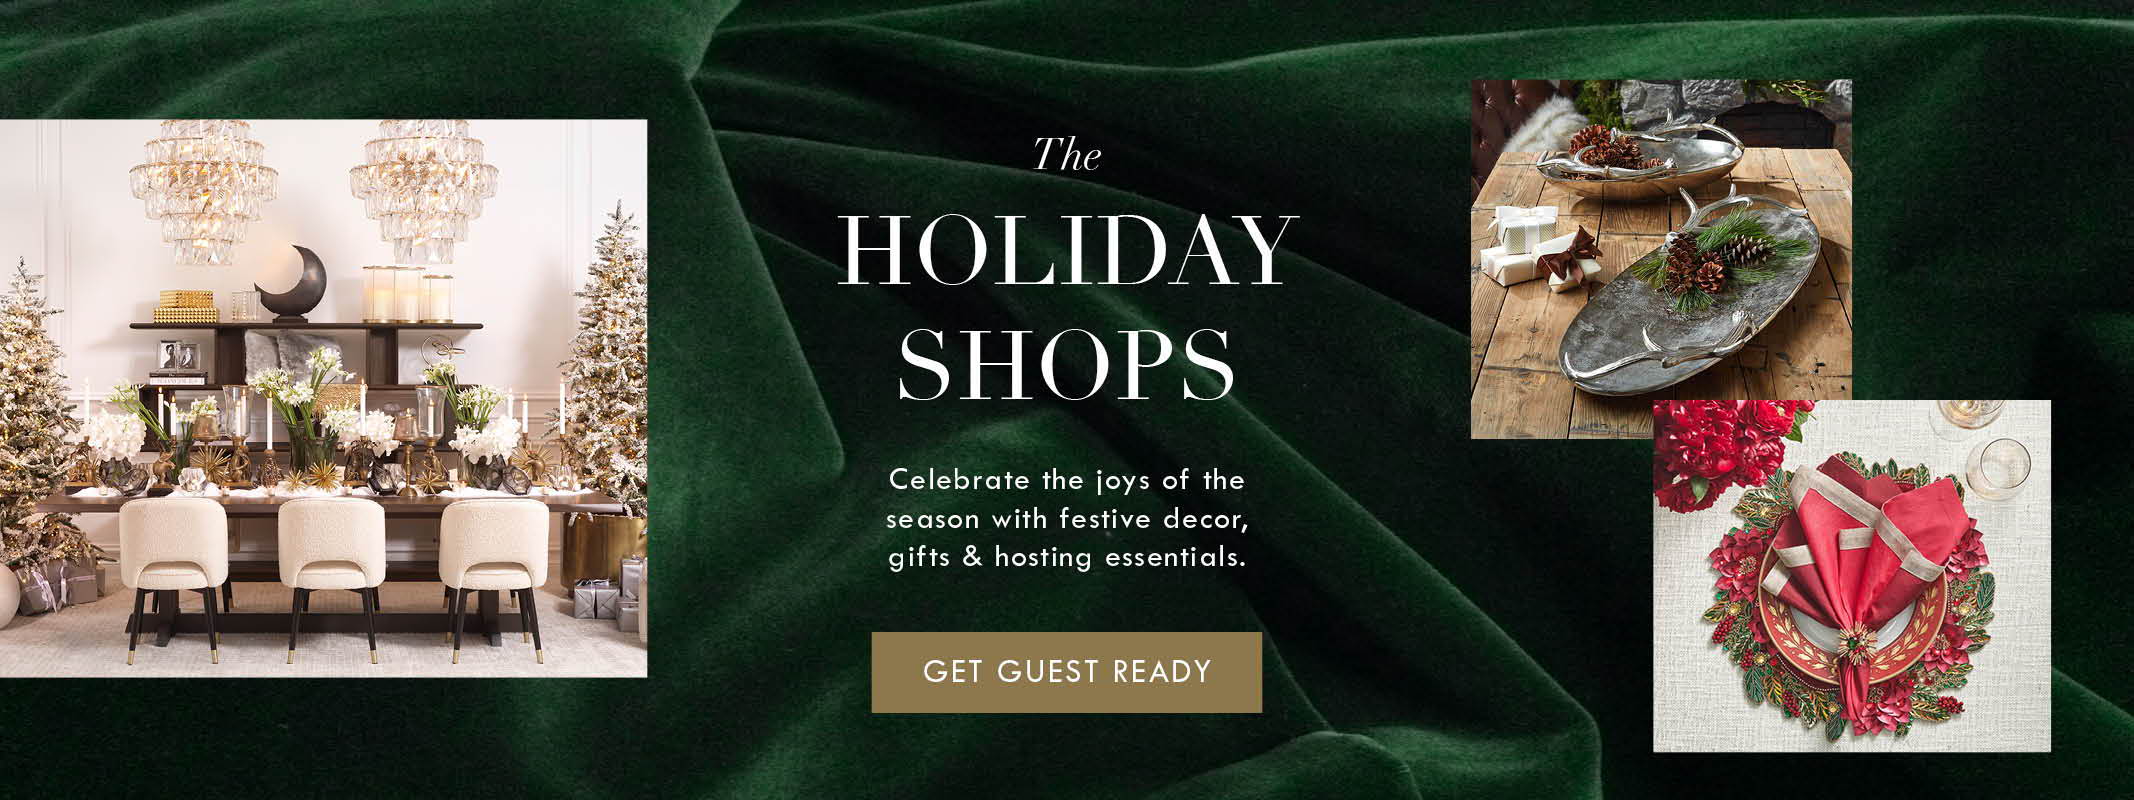 The Holiday Shops